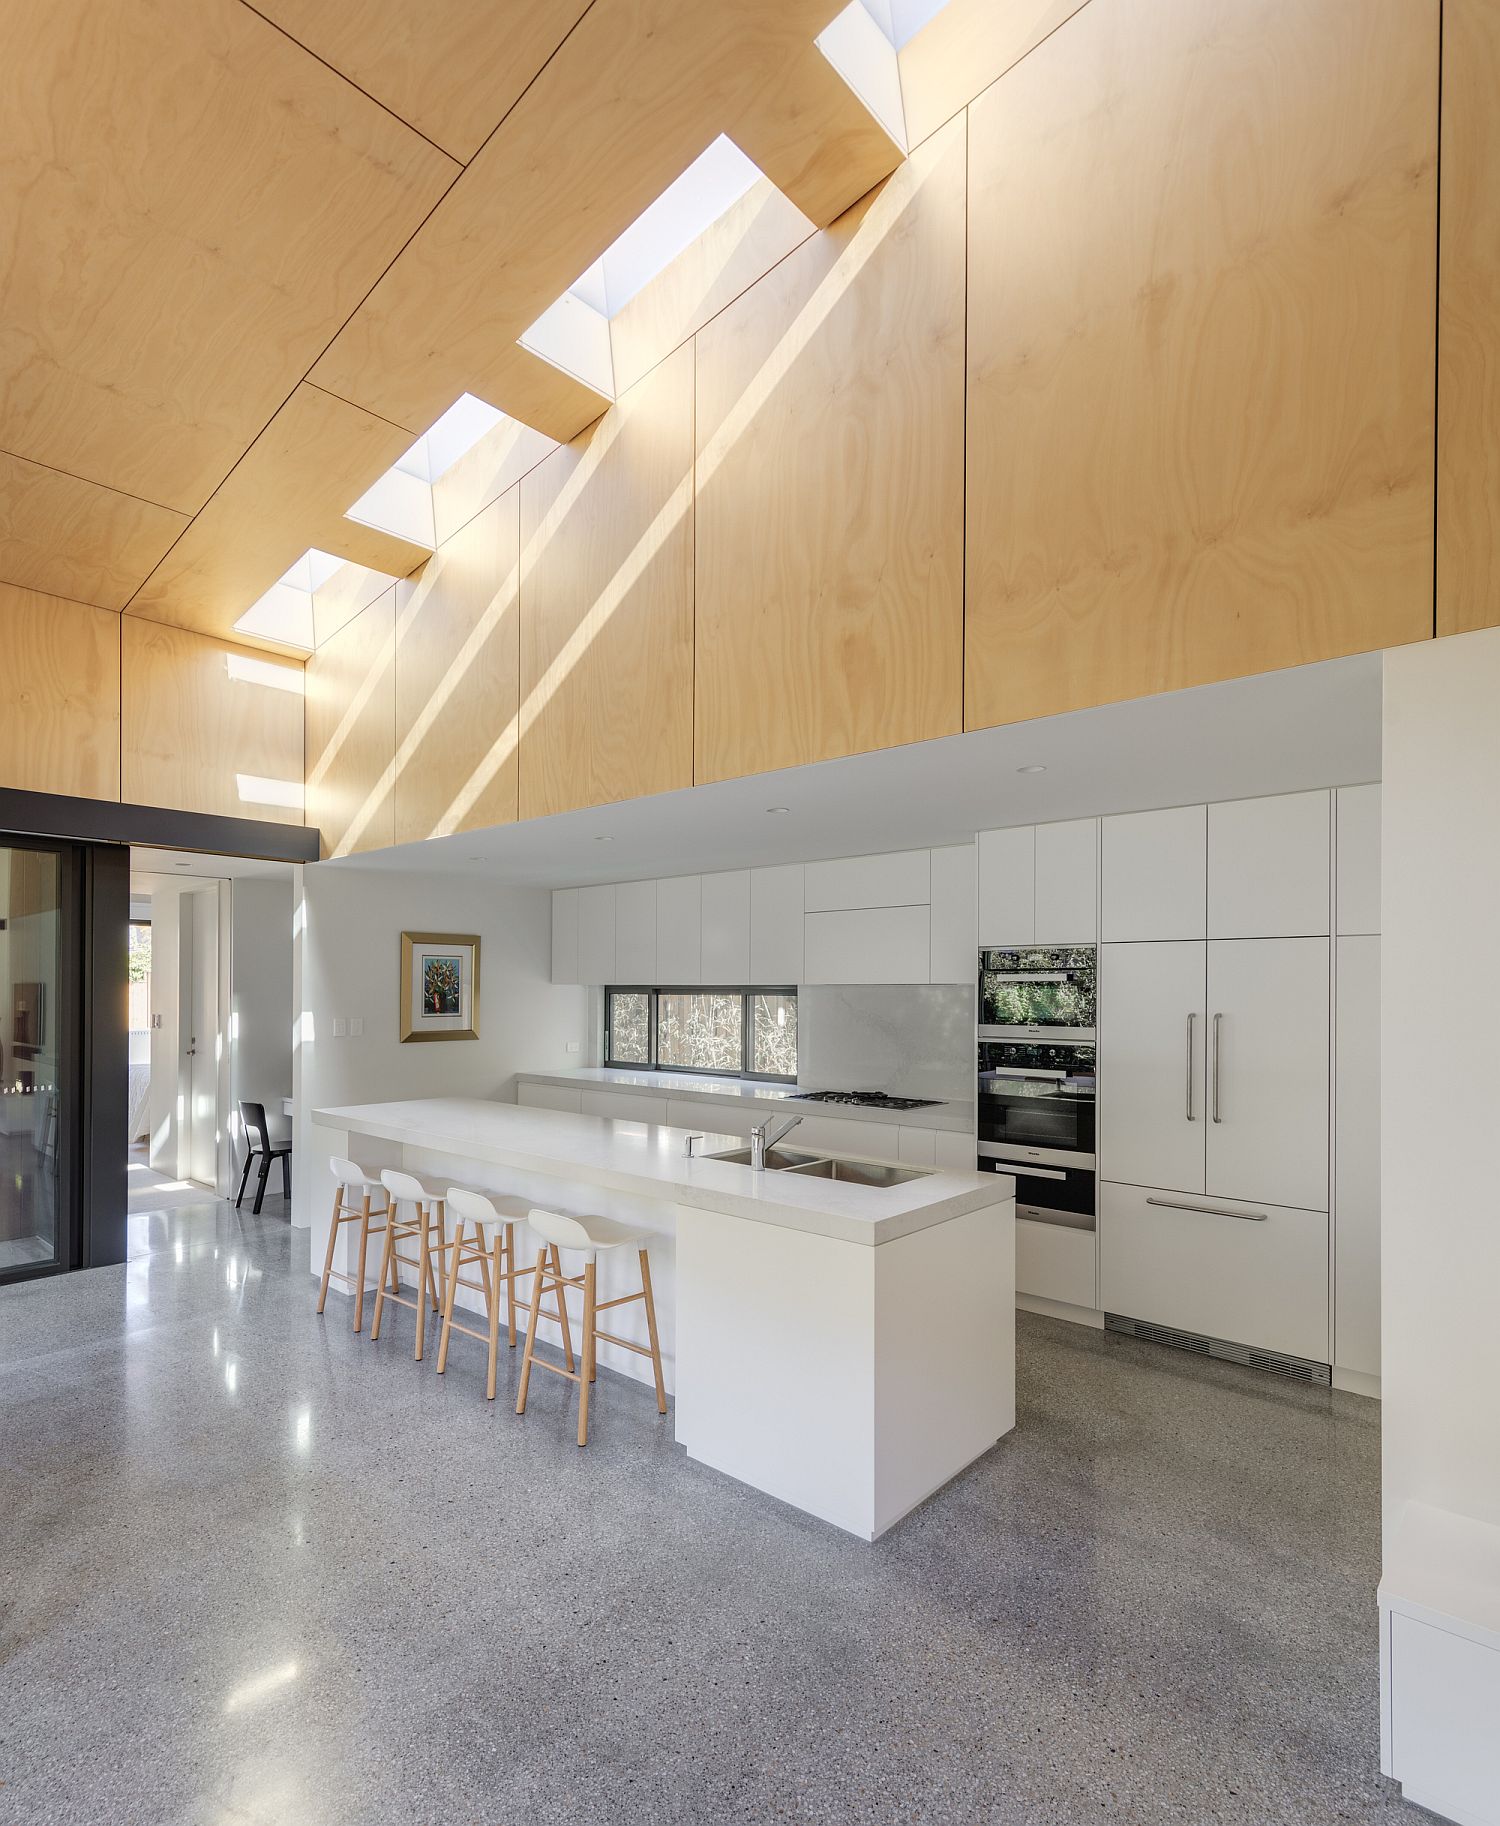 Smart placement of ventilation duct illuminates the lower level kitchen and dining area